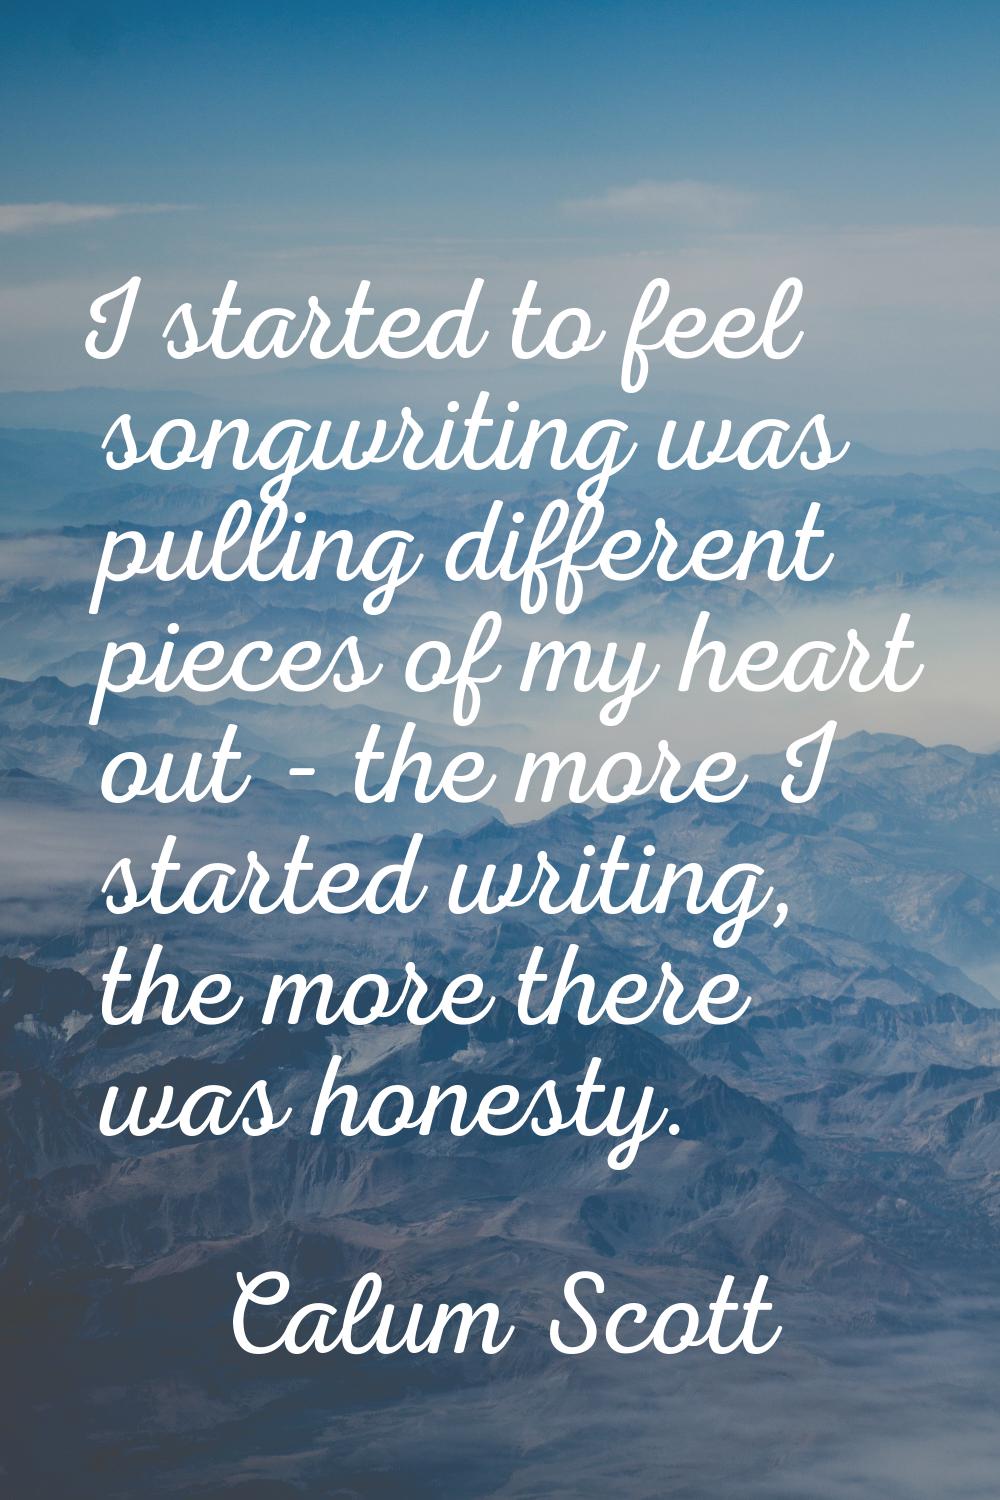 I started to feel songwriting was pulling different pieces of my heart out - the more I started wri